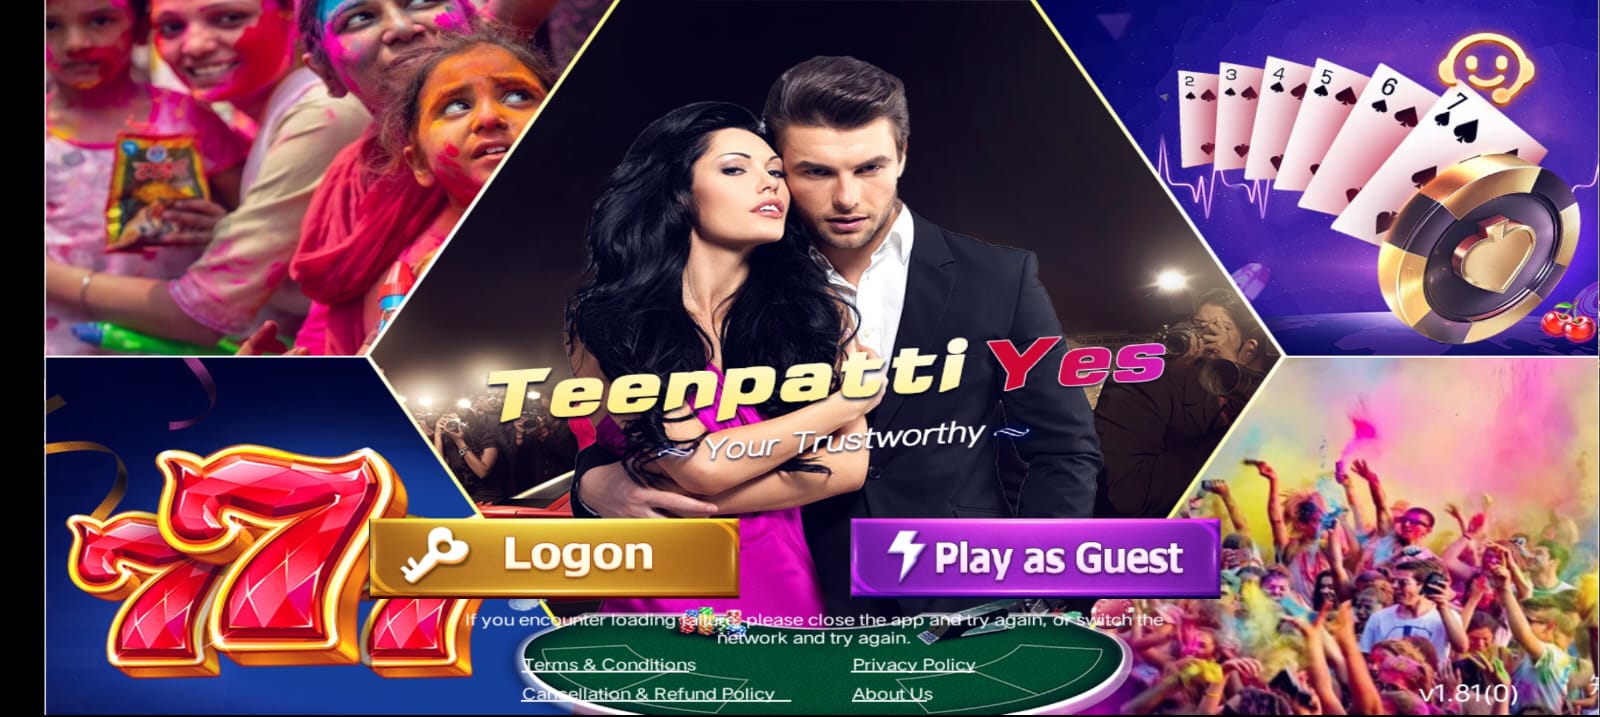 CREATE ACCOUNT IN TEEN PATTI YES APP